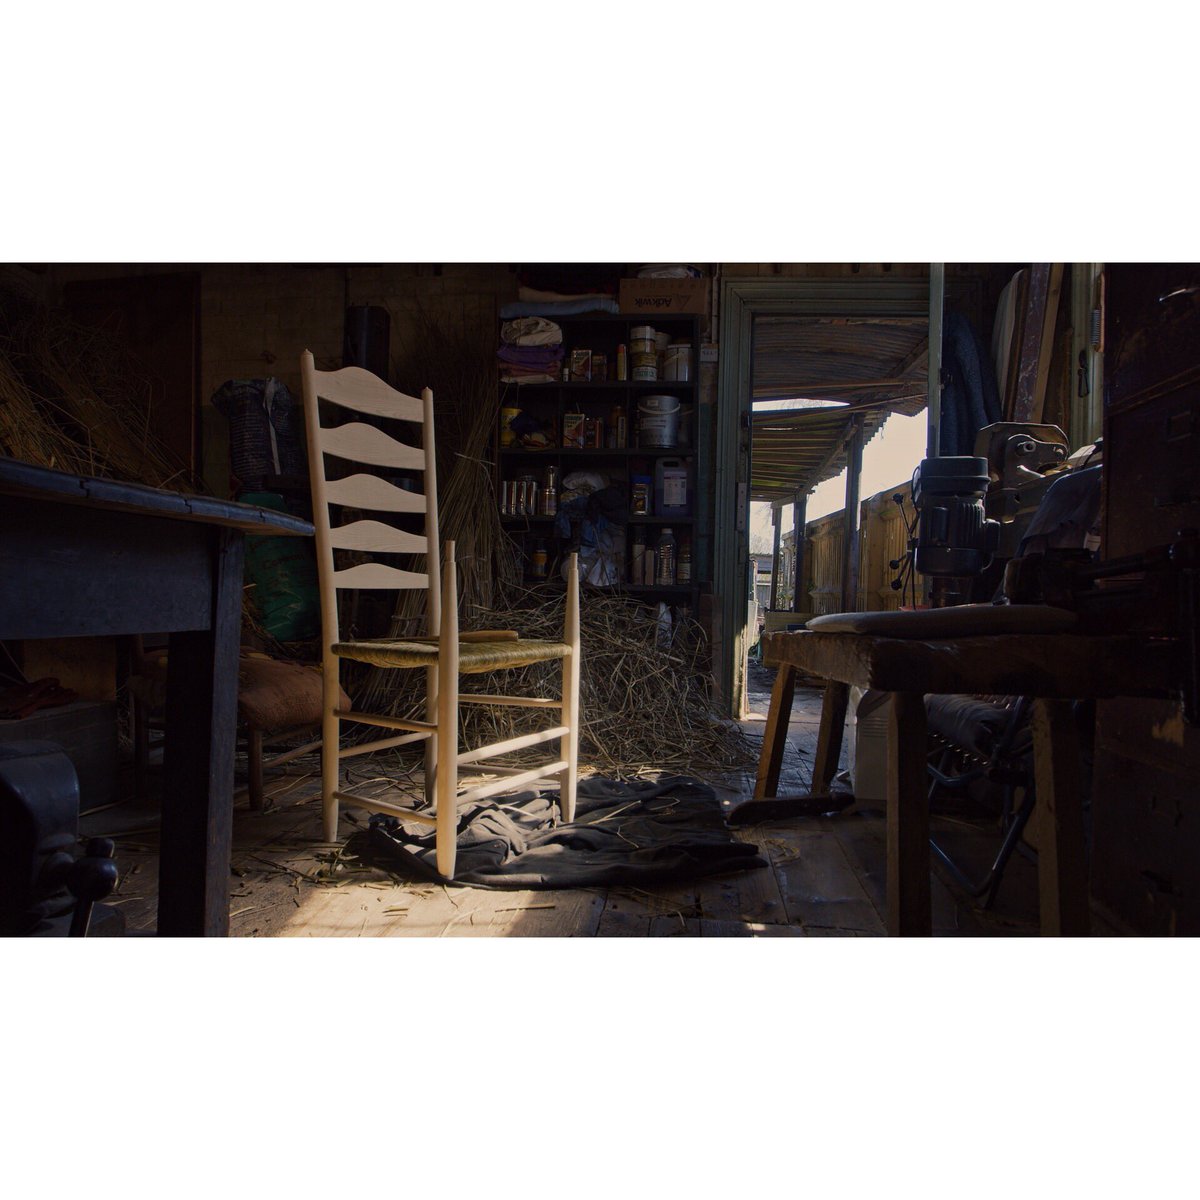 The Chair Maker: Lawrence Neal - available 30.08.18  #chairmaking #heritagecrafts #filmmaking